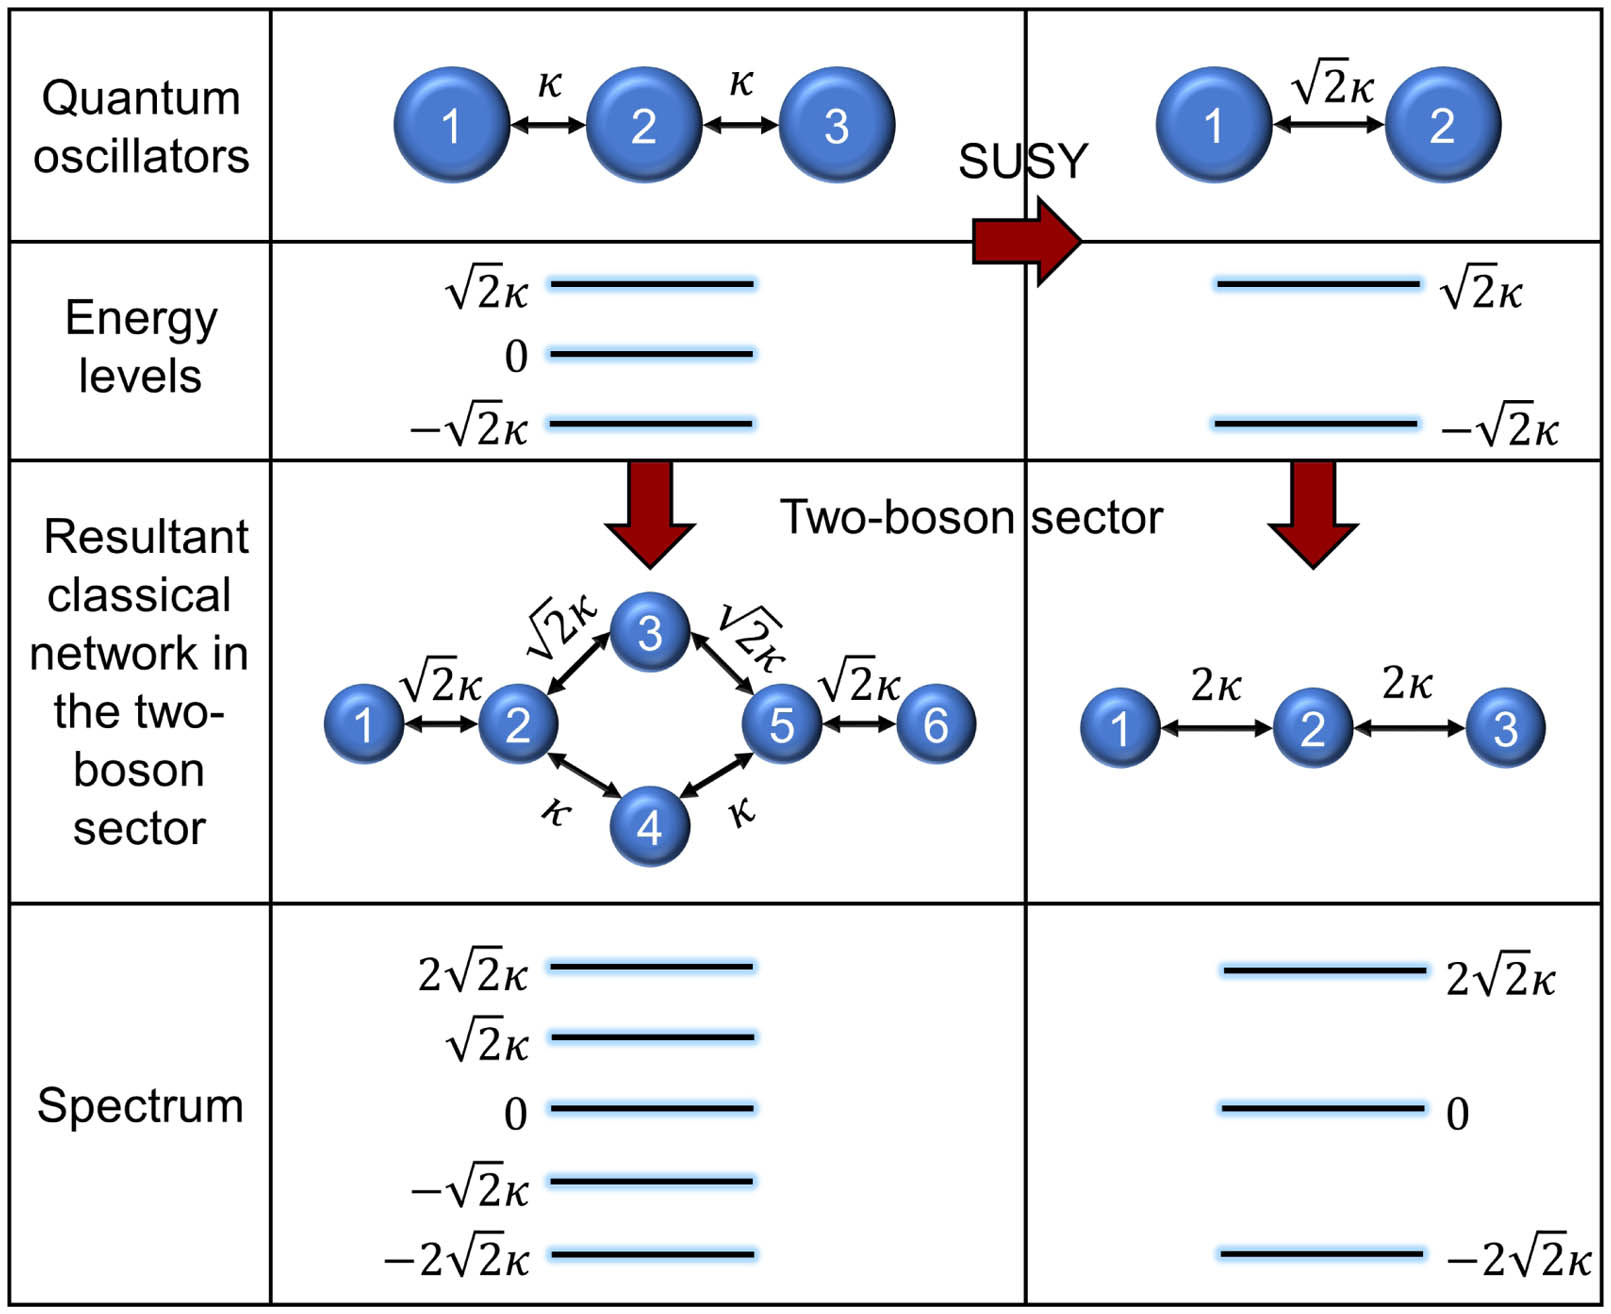 Summary of our proposed approach. A discrete SUSY transformation is applied to a set of N coupled quantum oscillators (for demonstration, we take N=3). The resultant partner network made of N−1 elements exhibits a subset of the spectrum of the original system. By populating both quantum networks with multiple bosons (2 bosons in the example shown here), we can construct classical arrays that exhibit partial spectral overlap.